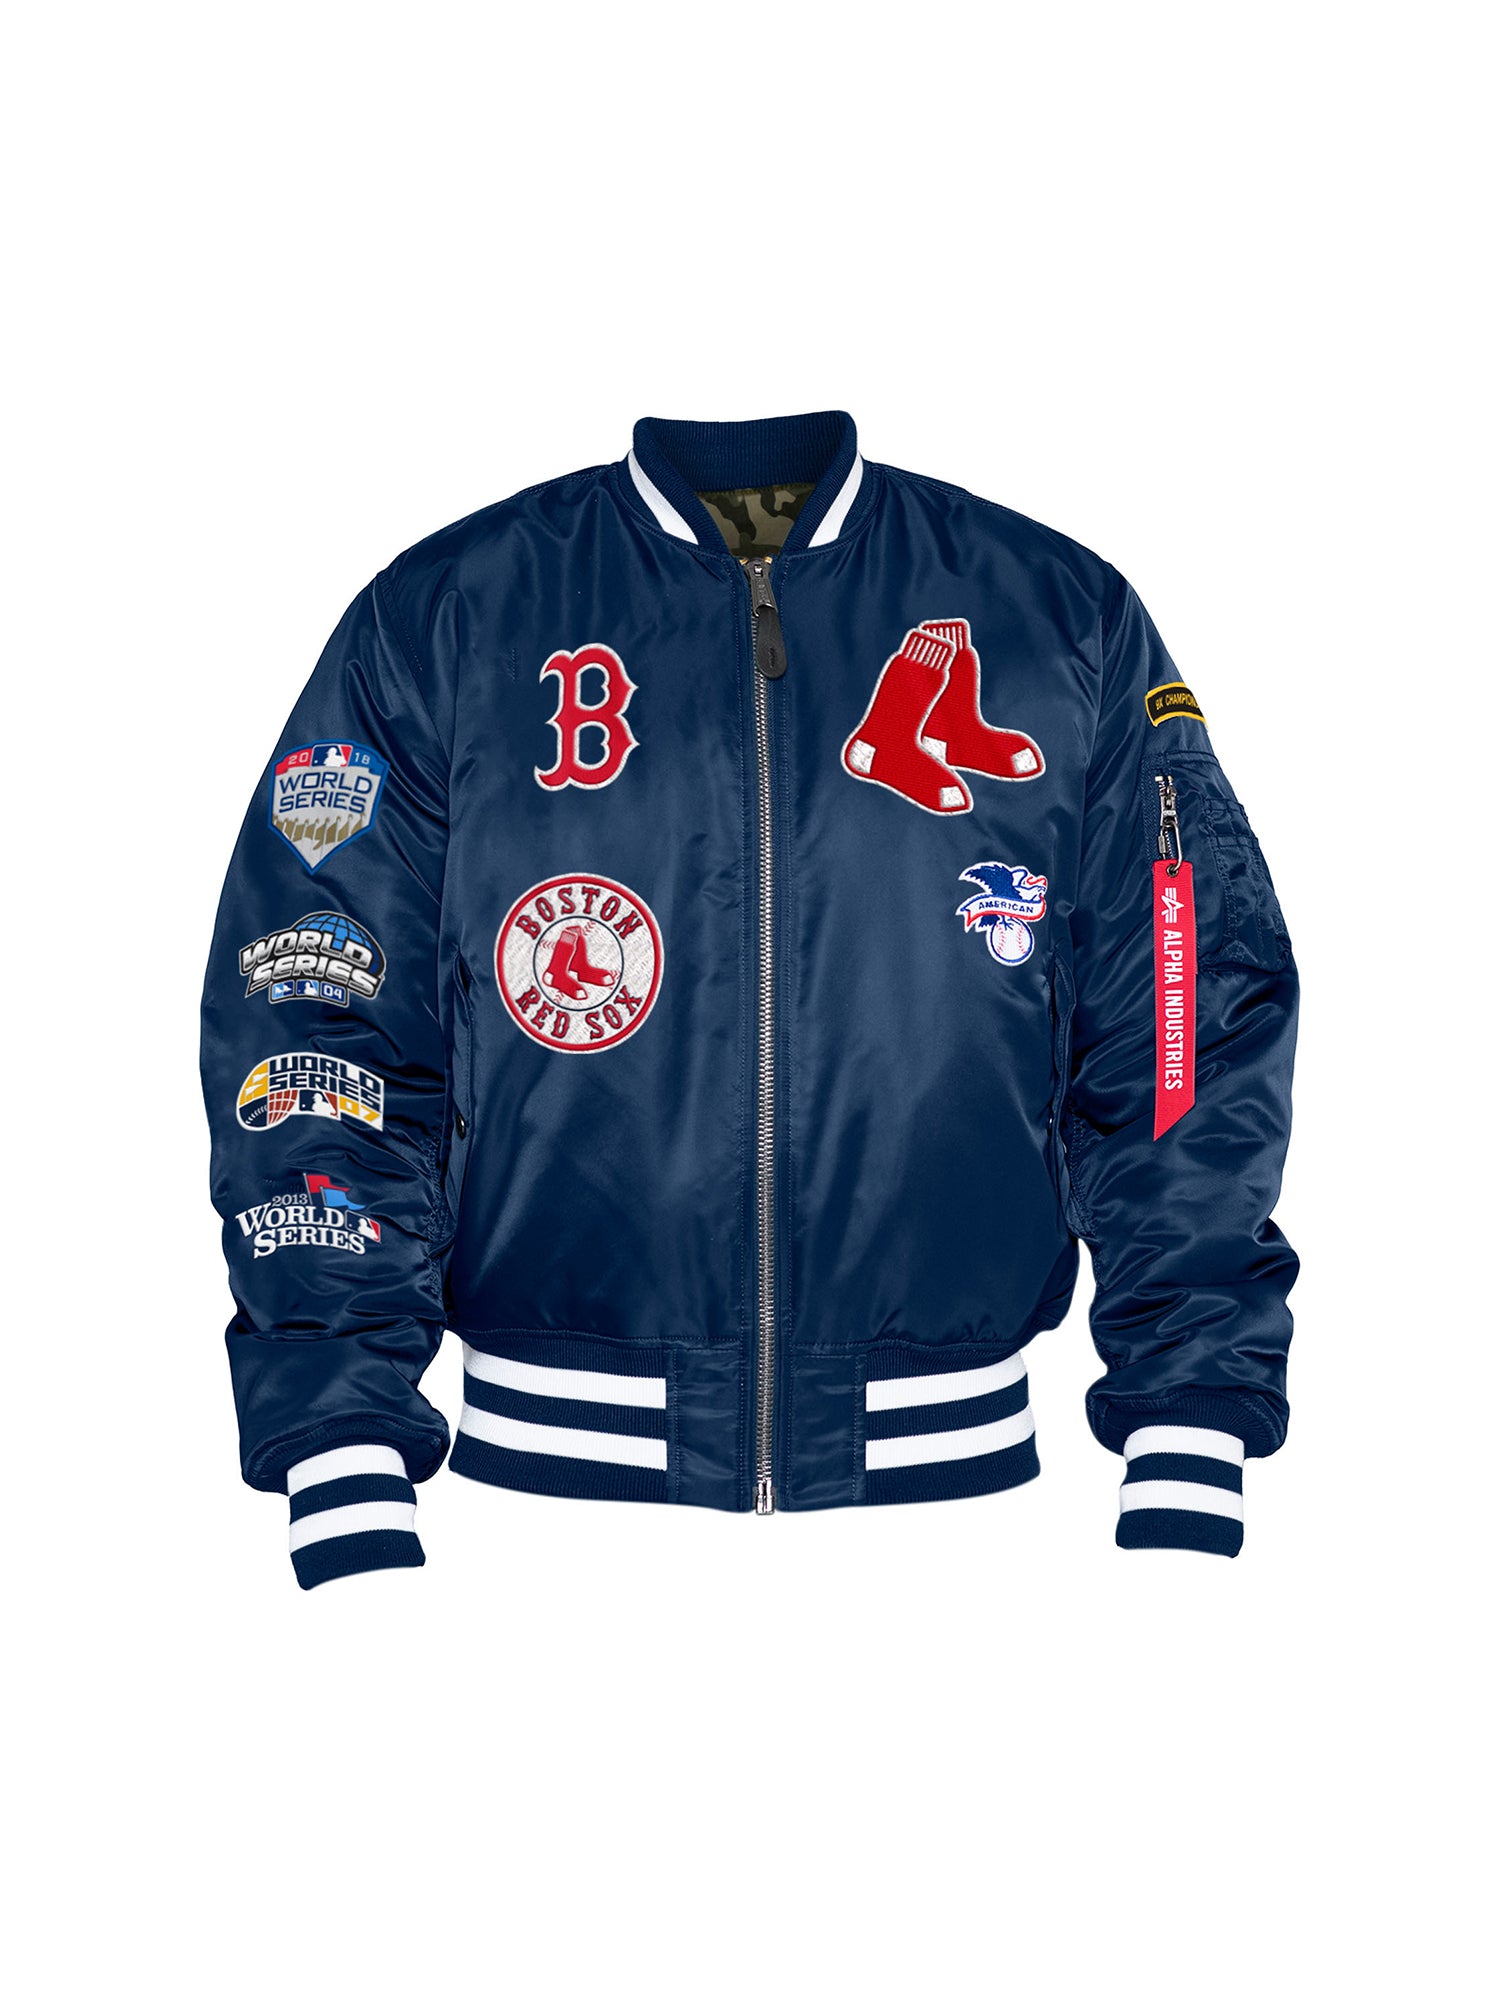 red Sox Jackets